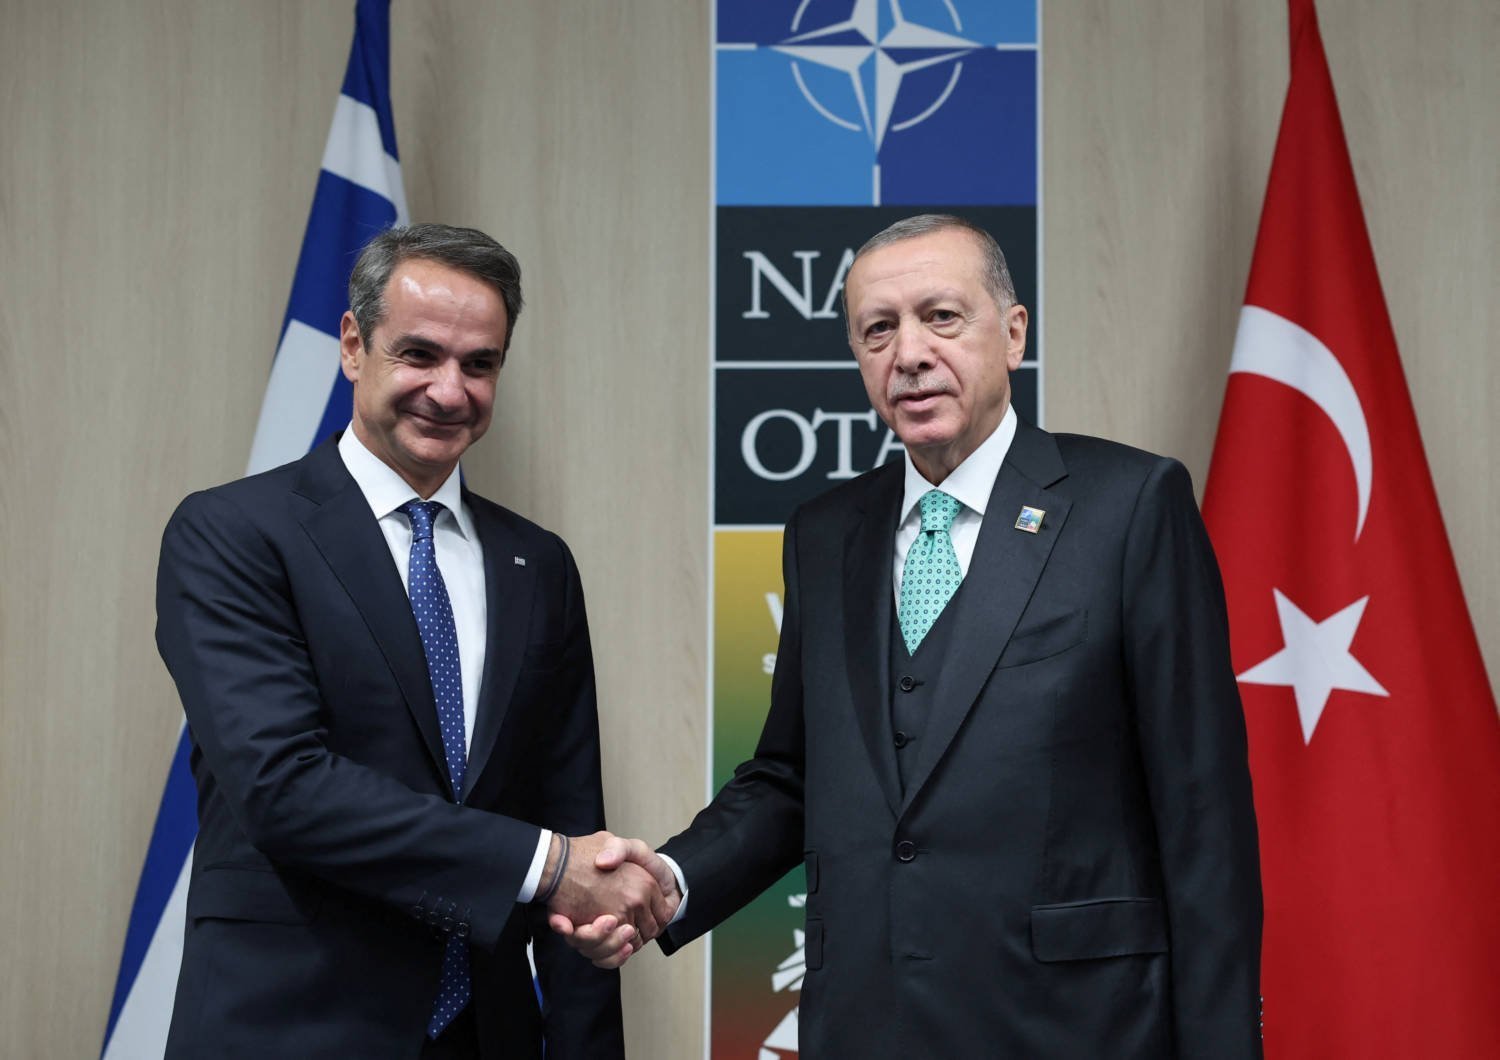 Turkish President Erdogan Meets With Greek Pm Mitsotakis During A Nato Leaders Summit In Vilnius